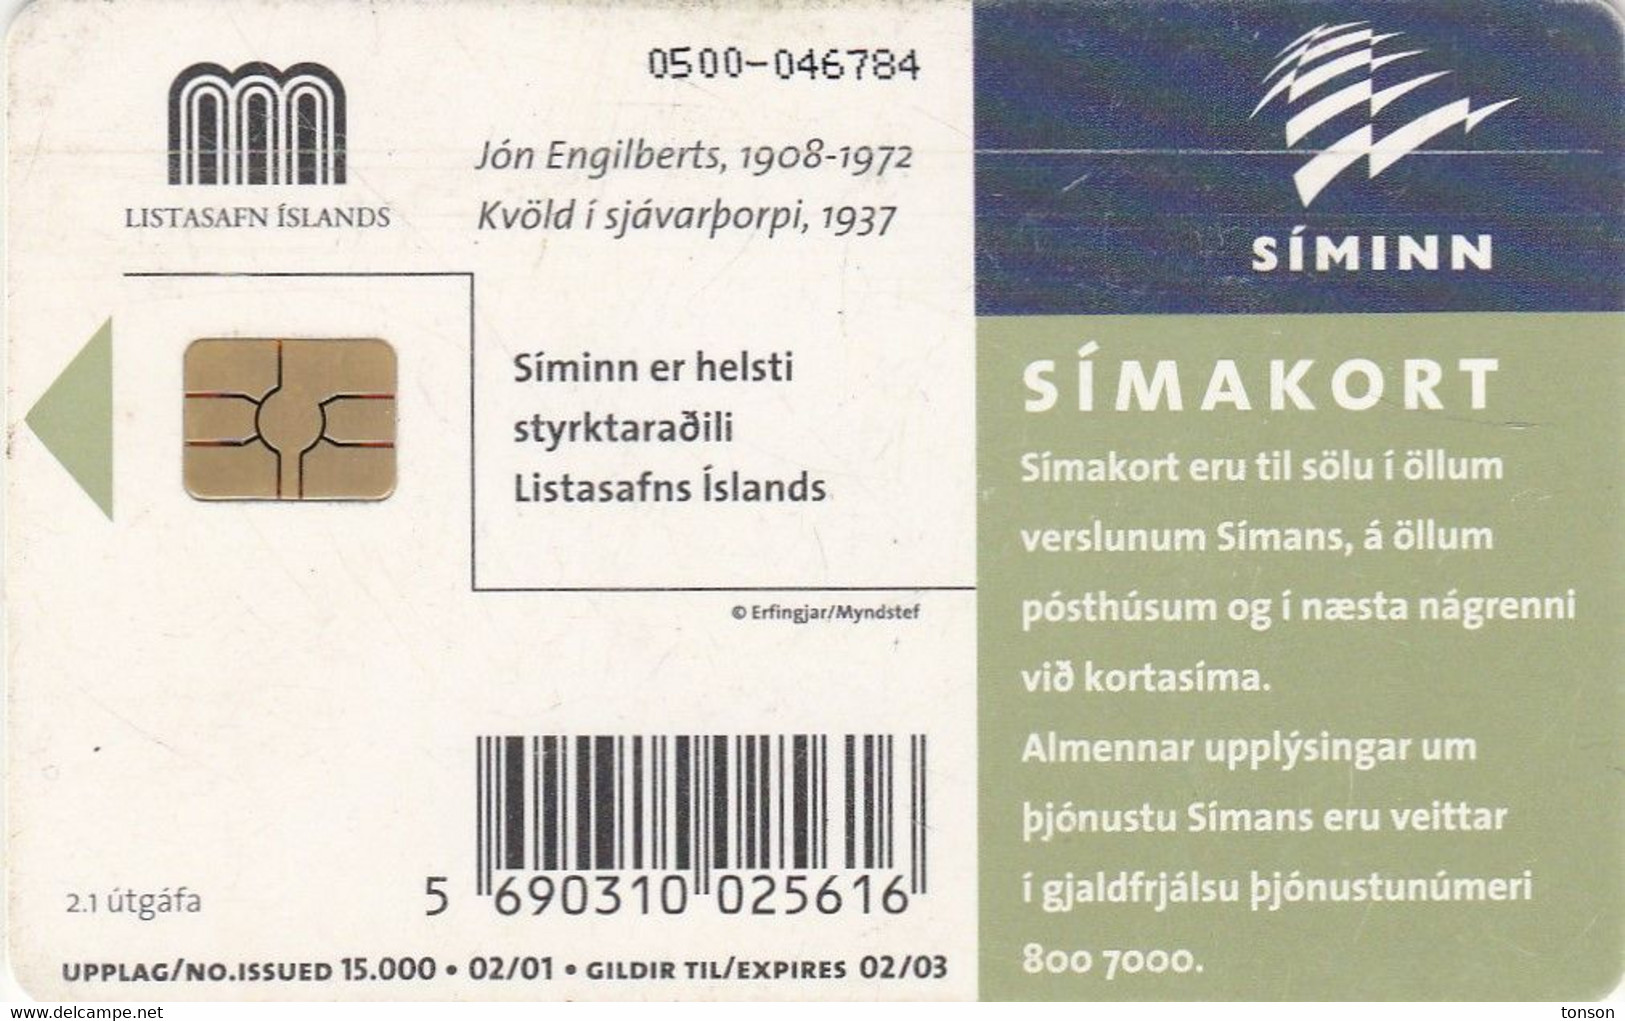 Iceland, ICE-C-02.1, 500 Kronur, Jon Engilberts's Painting, 2 Scans. Issued : 02/01 Expiry : 03/03, 2 Scans - Island